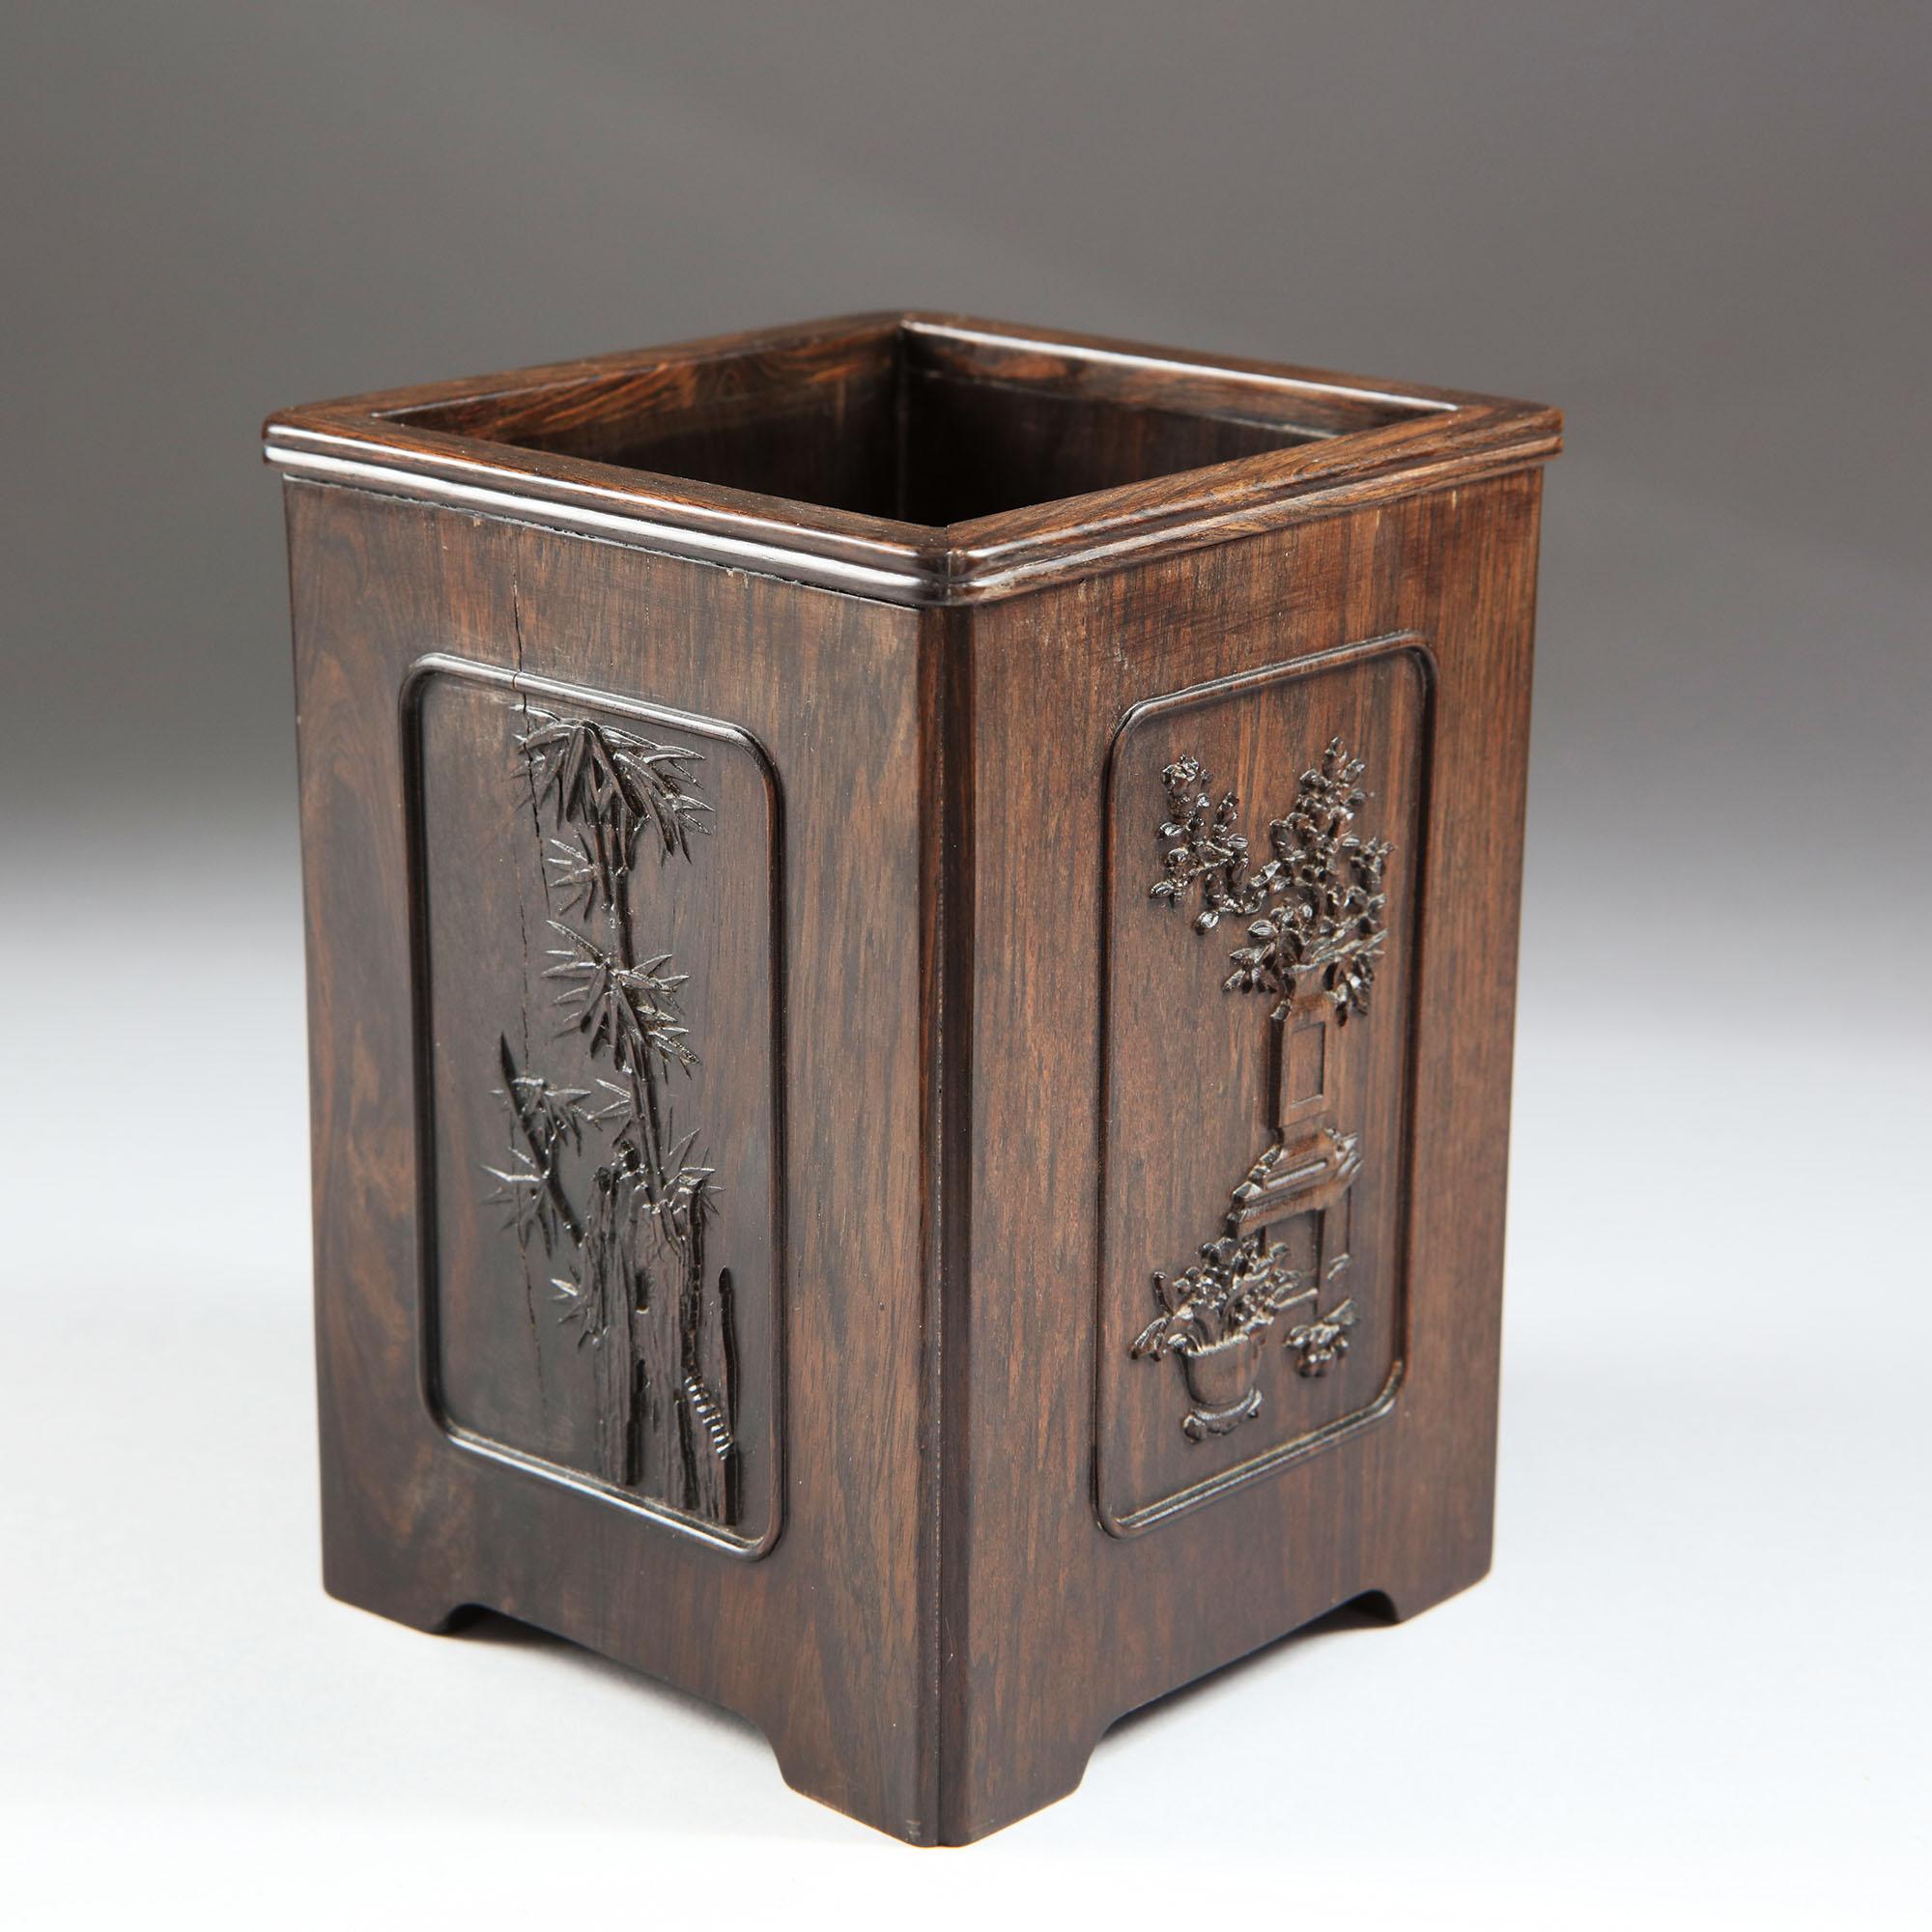 Huanghuali brush pot,
Qing dynasty, 19th century
of square form with high relief carved sides, the base having four short integral feet.

Dimensions approximate.